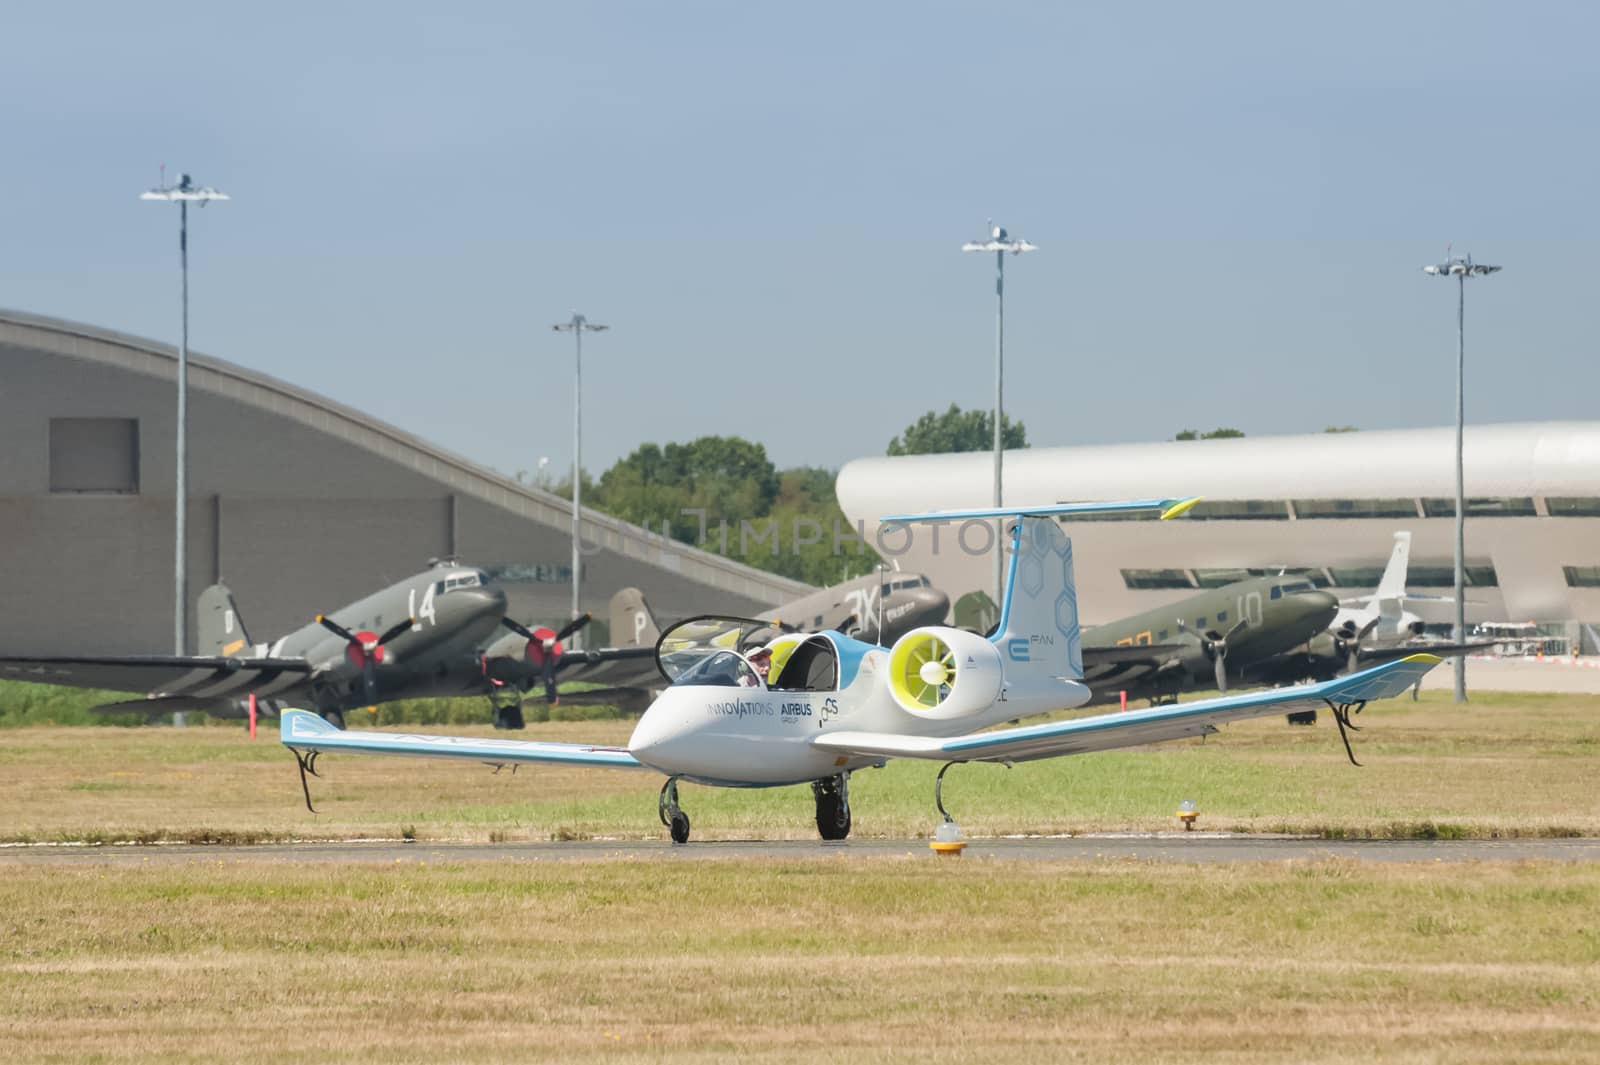 Farnborough, UK - July 18, 2014: The E-Fan, an all electric aircraft developed by Airbus, sharing the taxiway with vintage DC-3 Dakota aircraft at the Farnborough airshow, UK